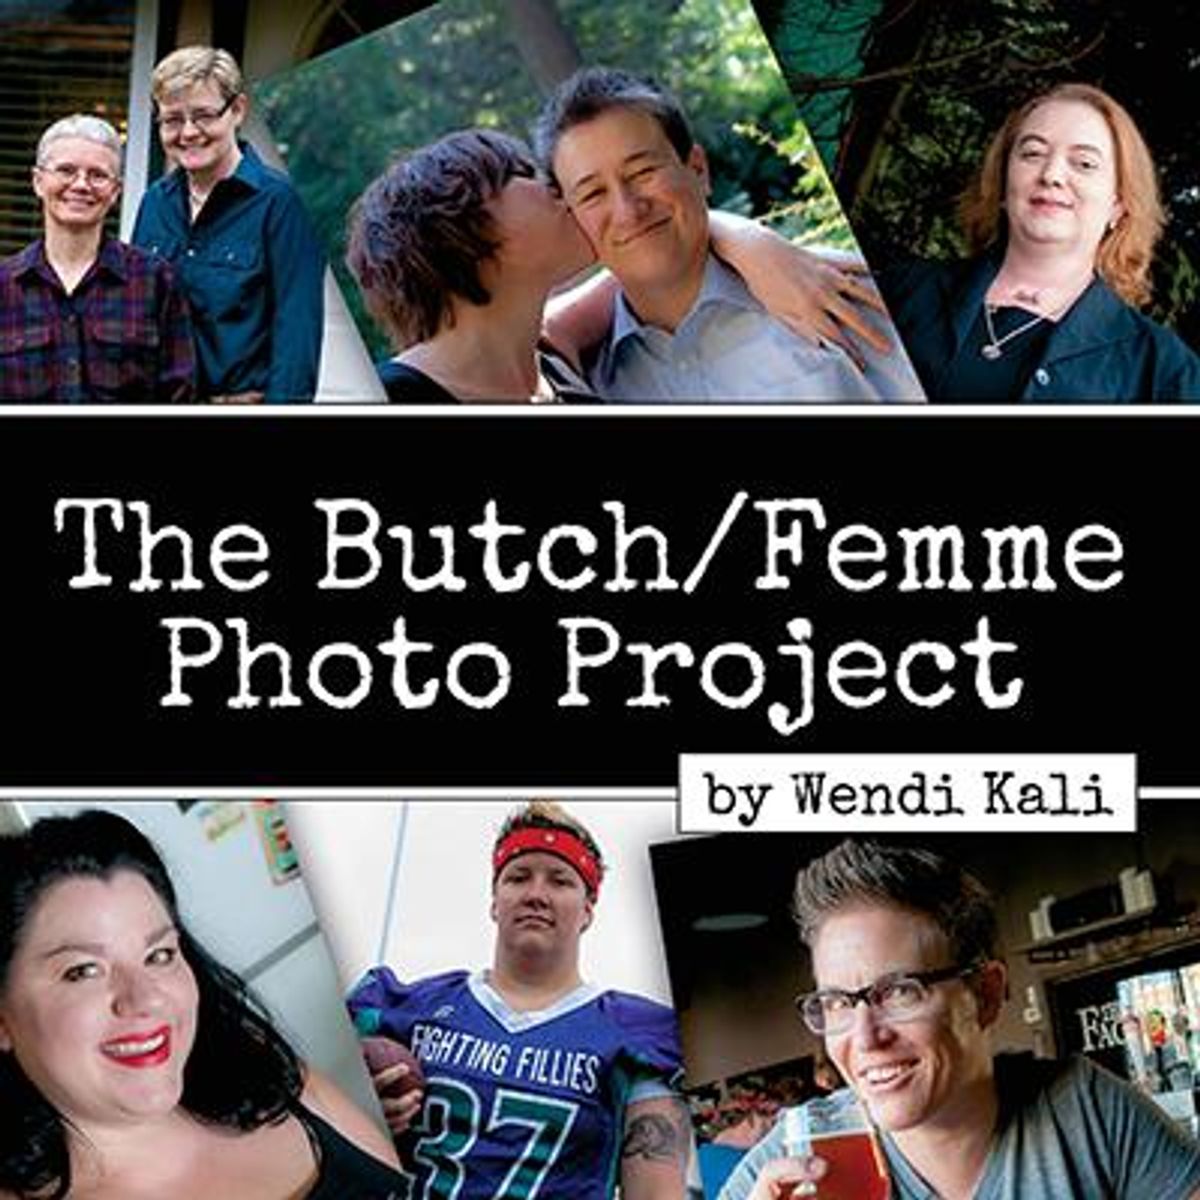 Butch-femme-photo-project-book-cover-front-lead-deep